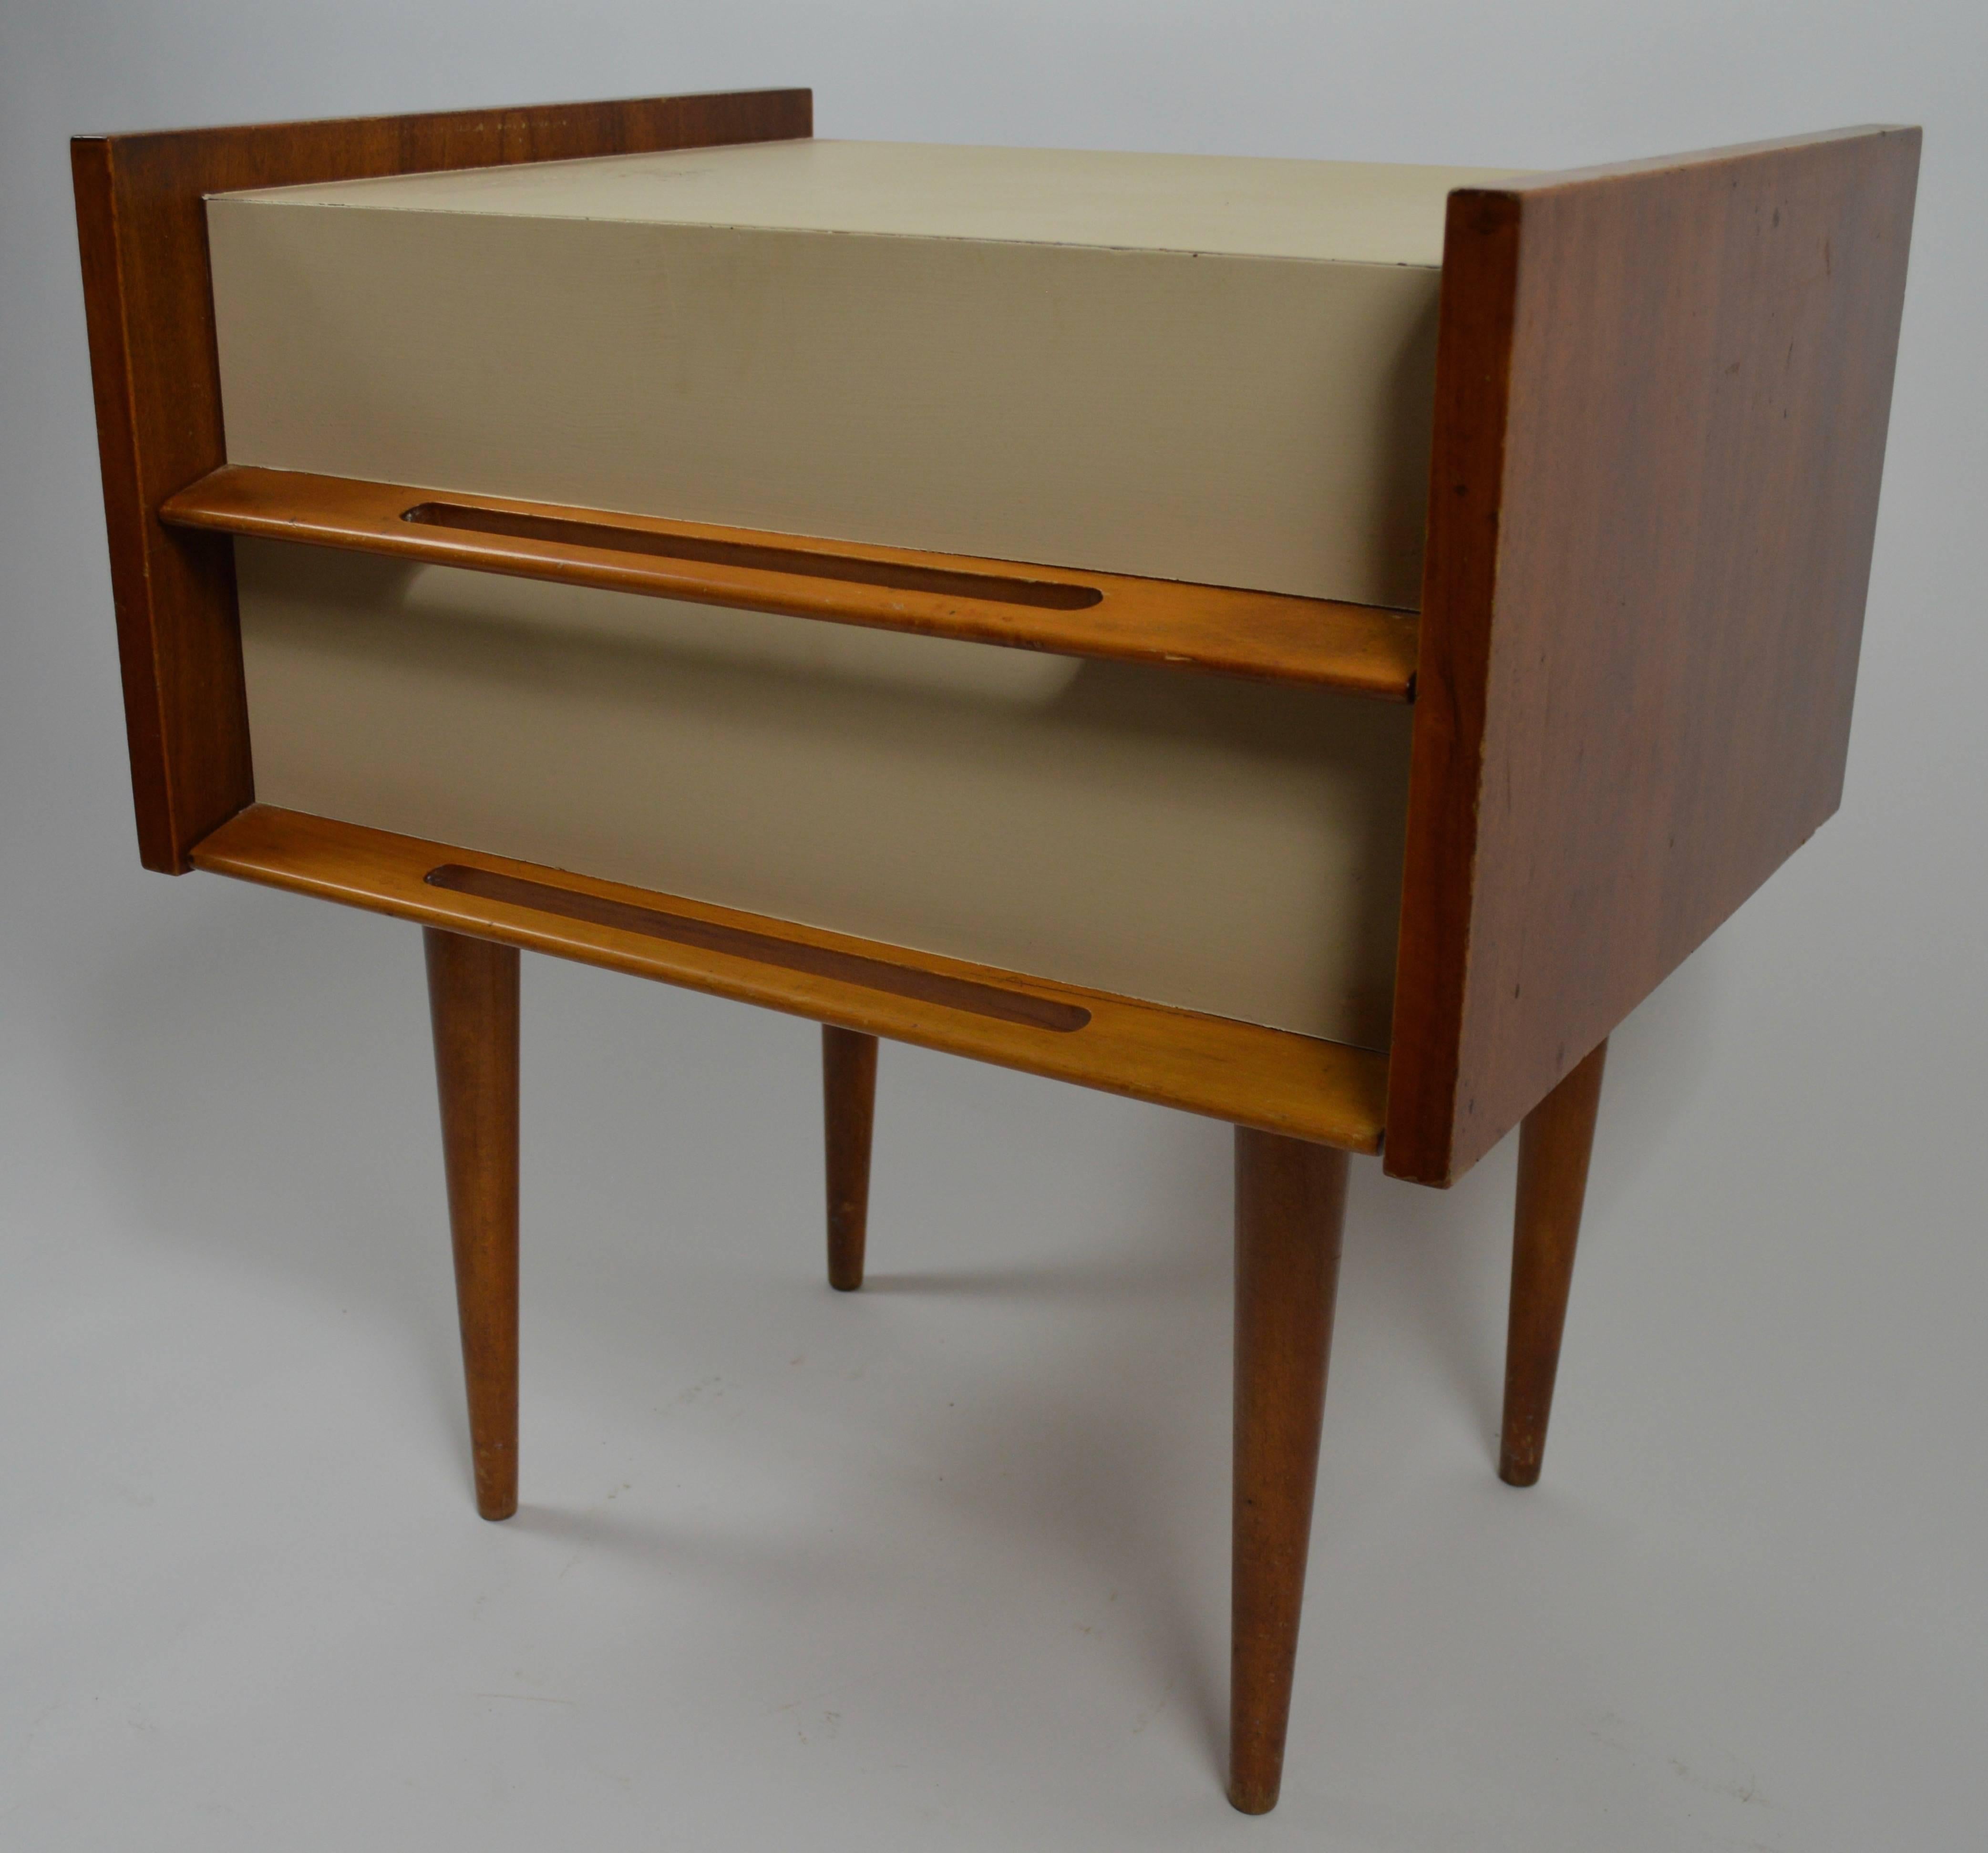 Birch Pair of Edmund Spence Blonde and White Two-Drawer Nightstands